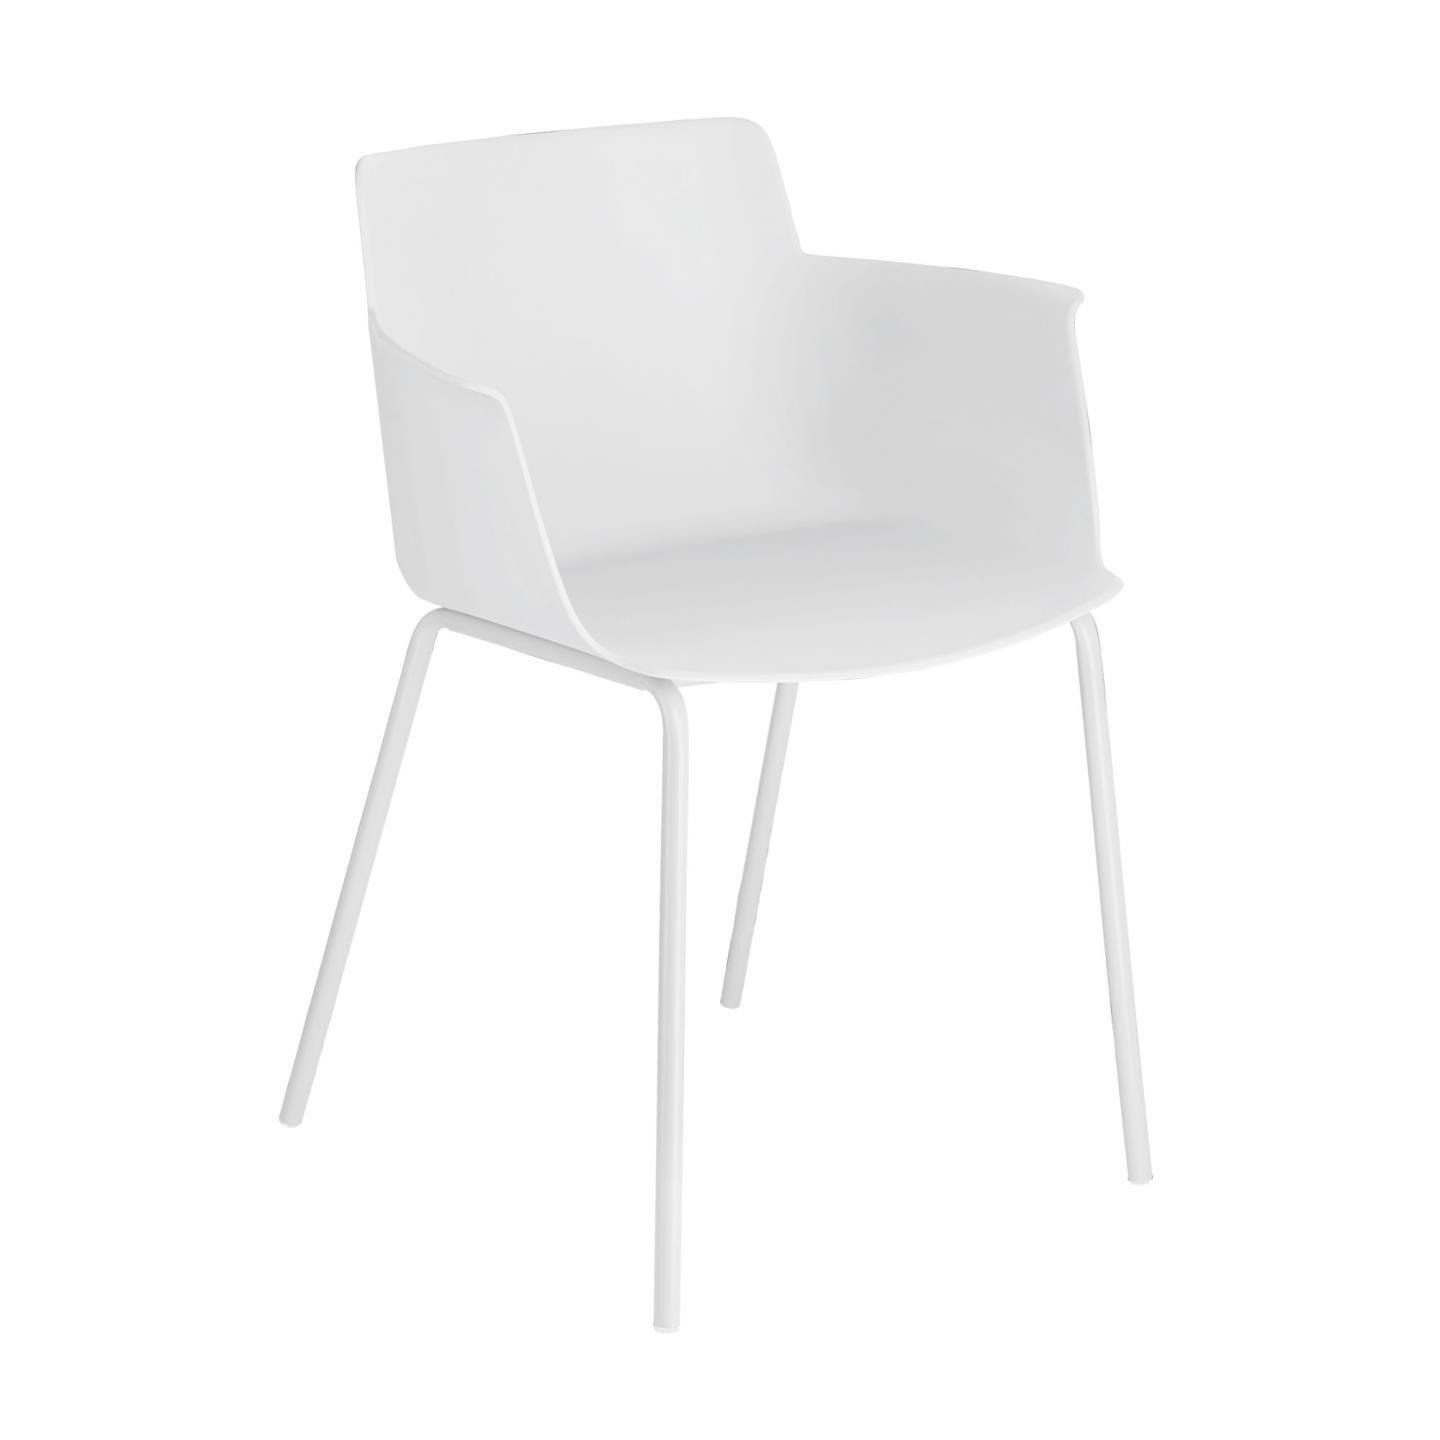 Hannia white chair with arms